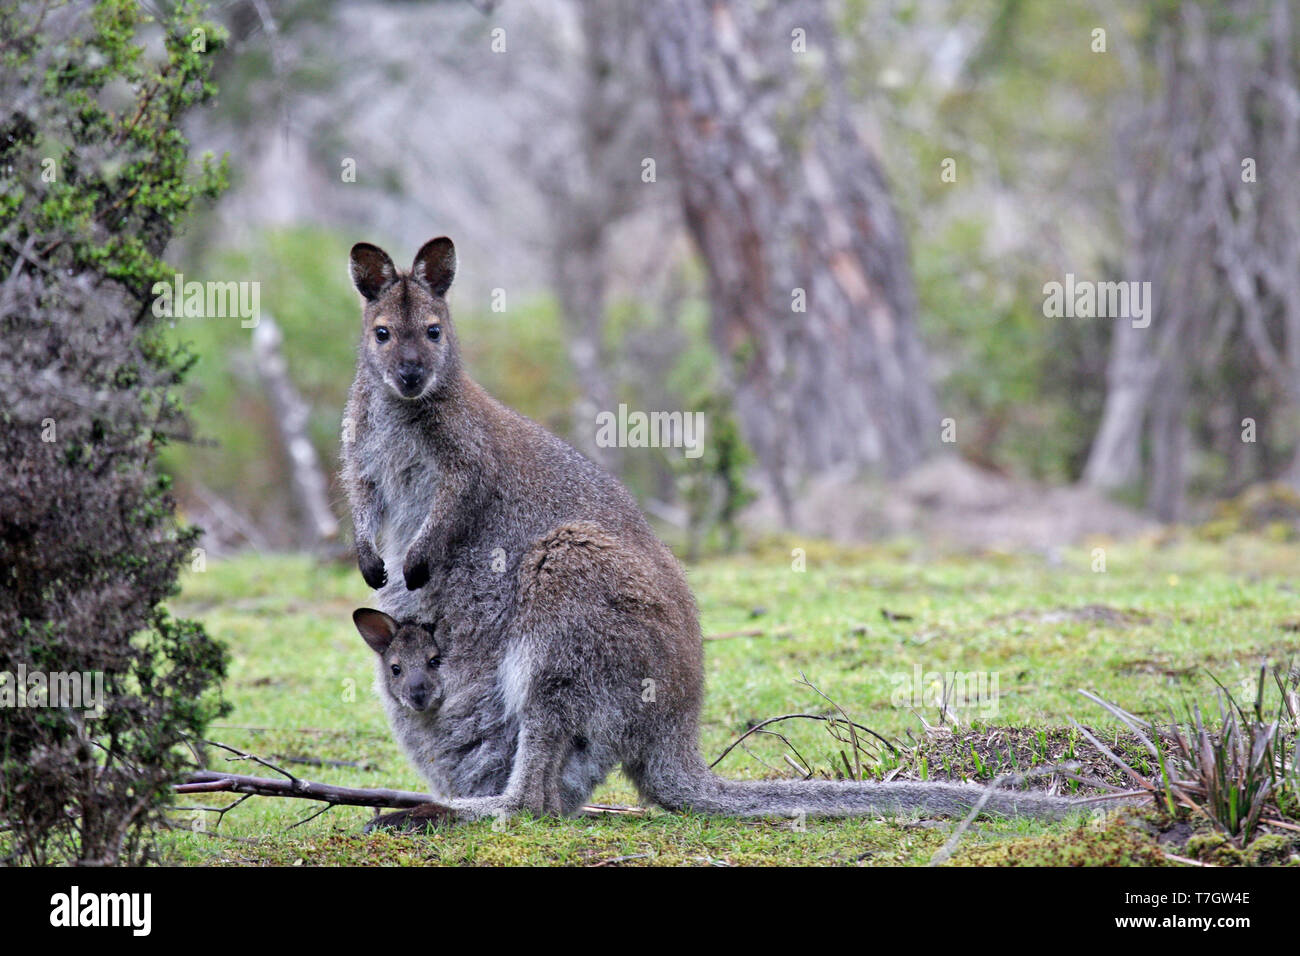 Red-necked Wallaby or Bennett's Wallaby (Macropus rufogriseus) with a young Stock Photo